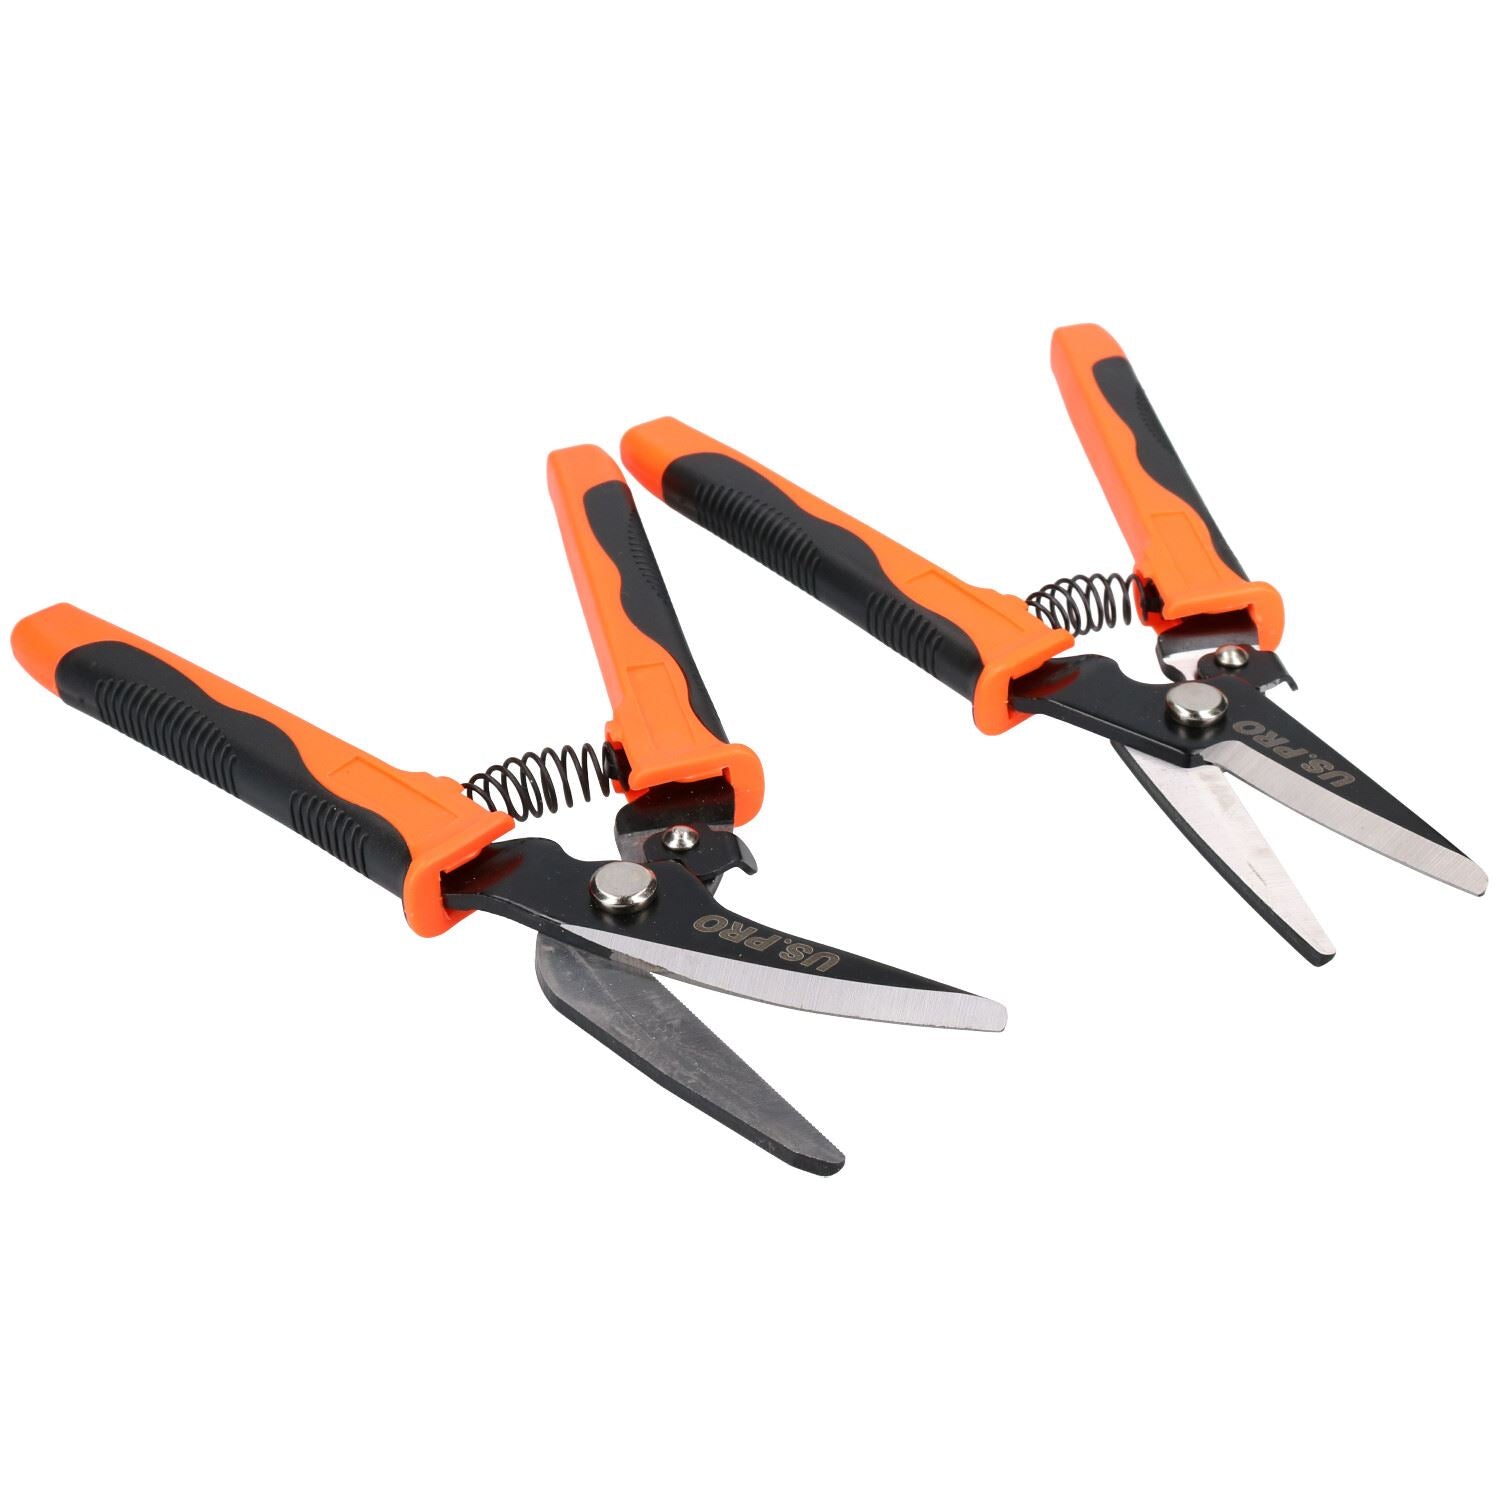 2pc Multipurpose Metal Snips Cutters Cutting With Stainless Steel Blades